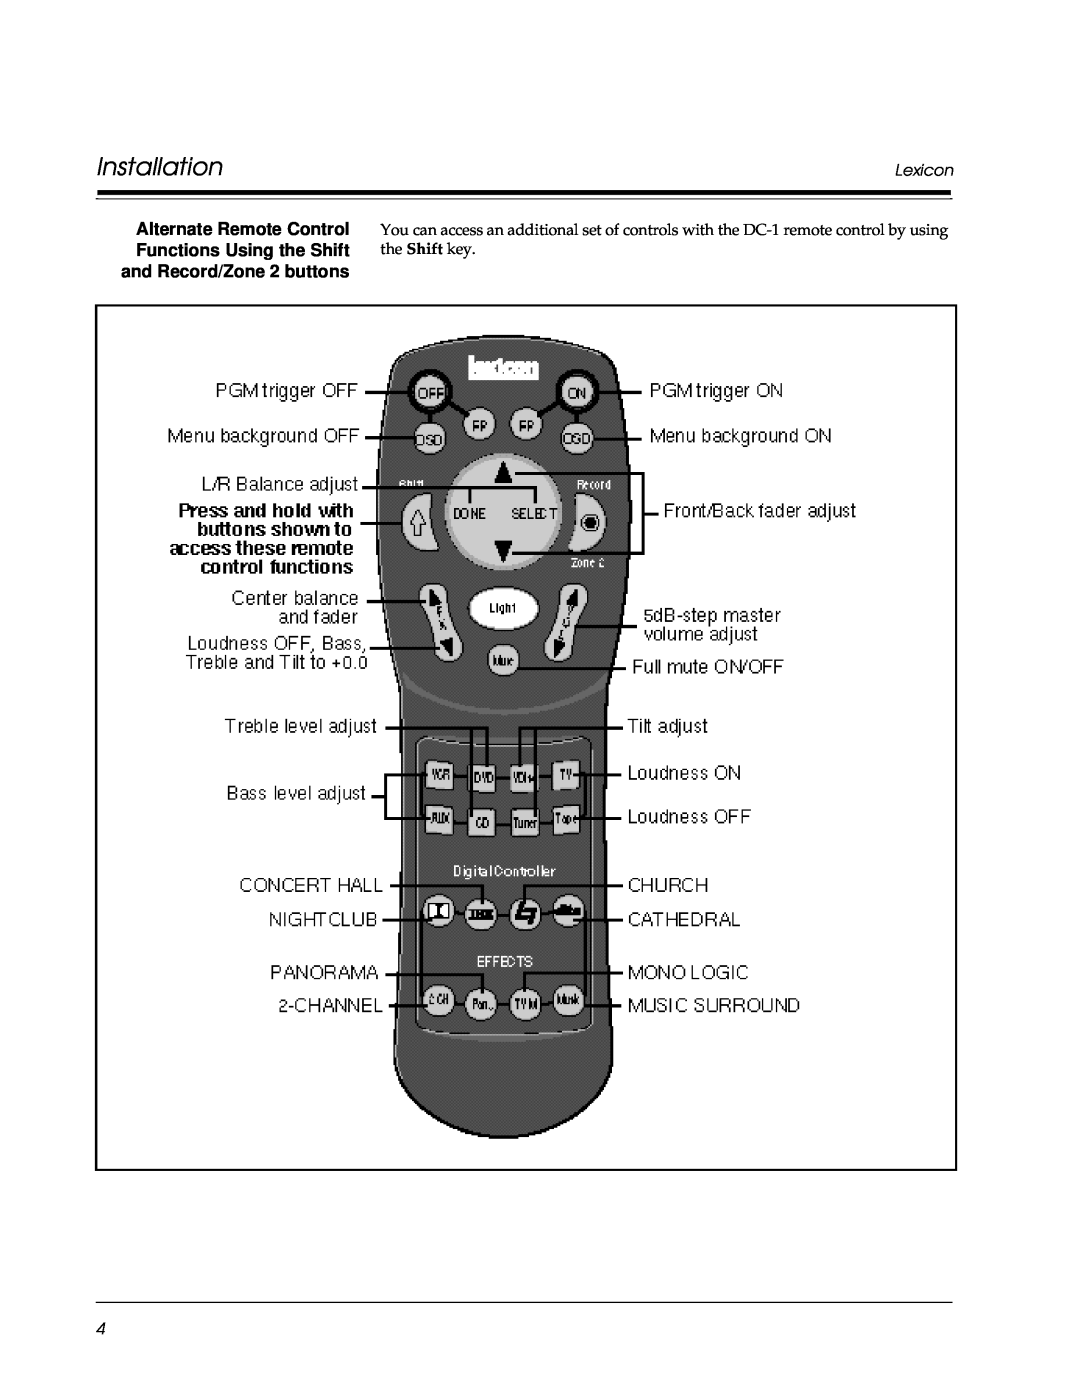 Lexicon Lexicon Part #070-13234 owner manual Alternate Remote Control, Functions Using the Shift, and Record/Zone 2 buttons 